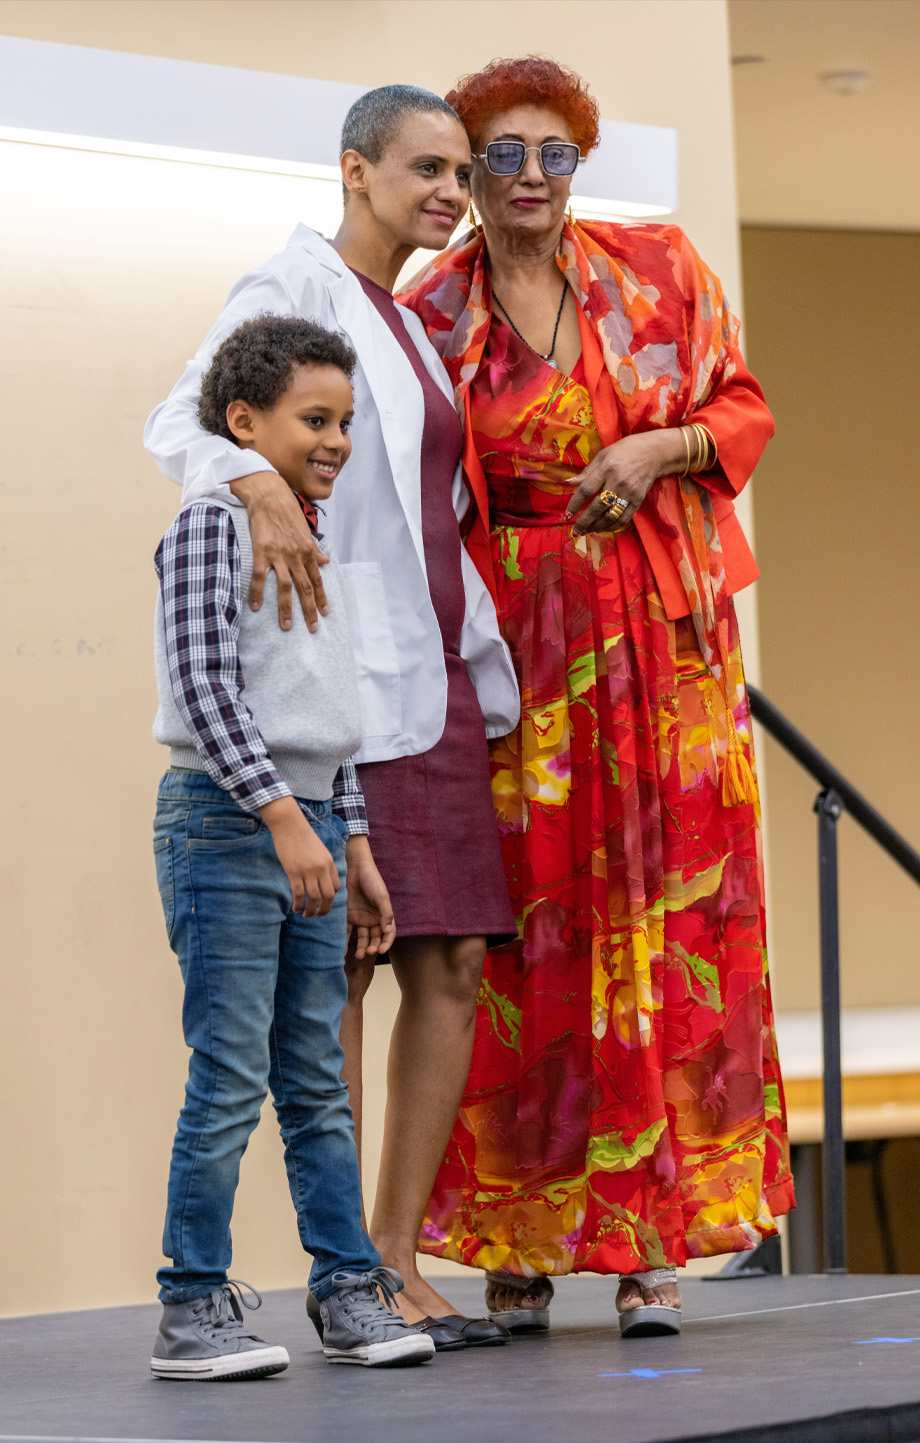 student in white coat stands in center posing on stage with right arm around son and left arm around mother